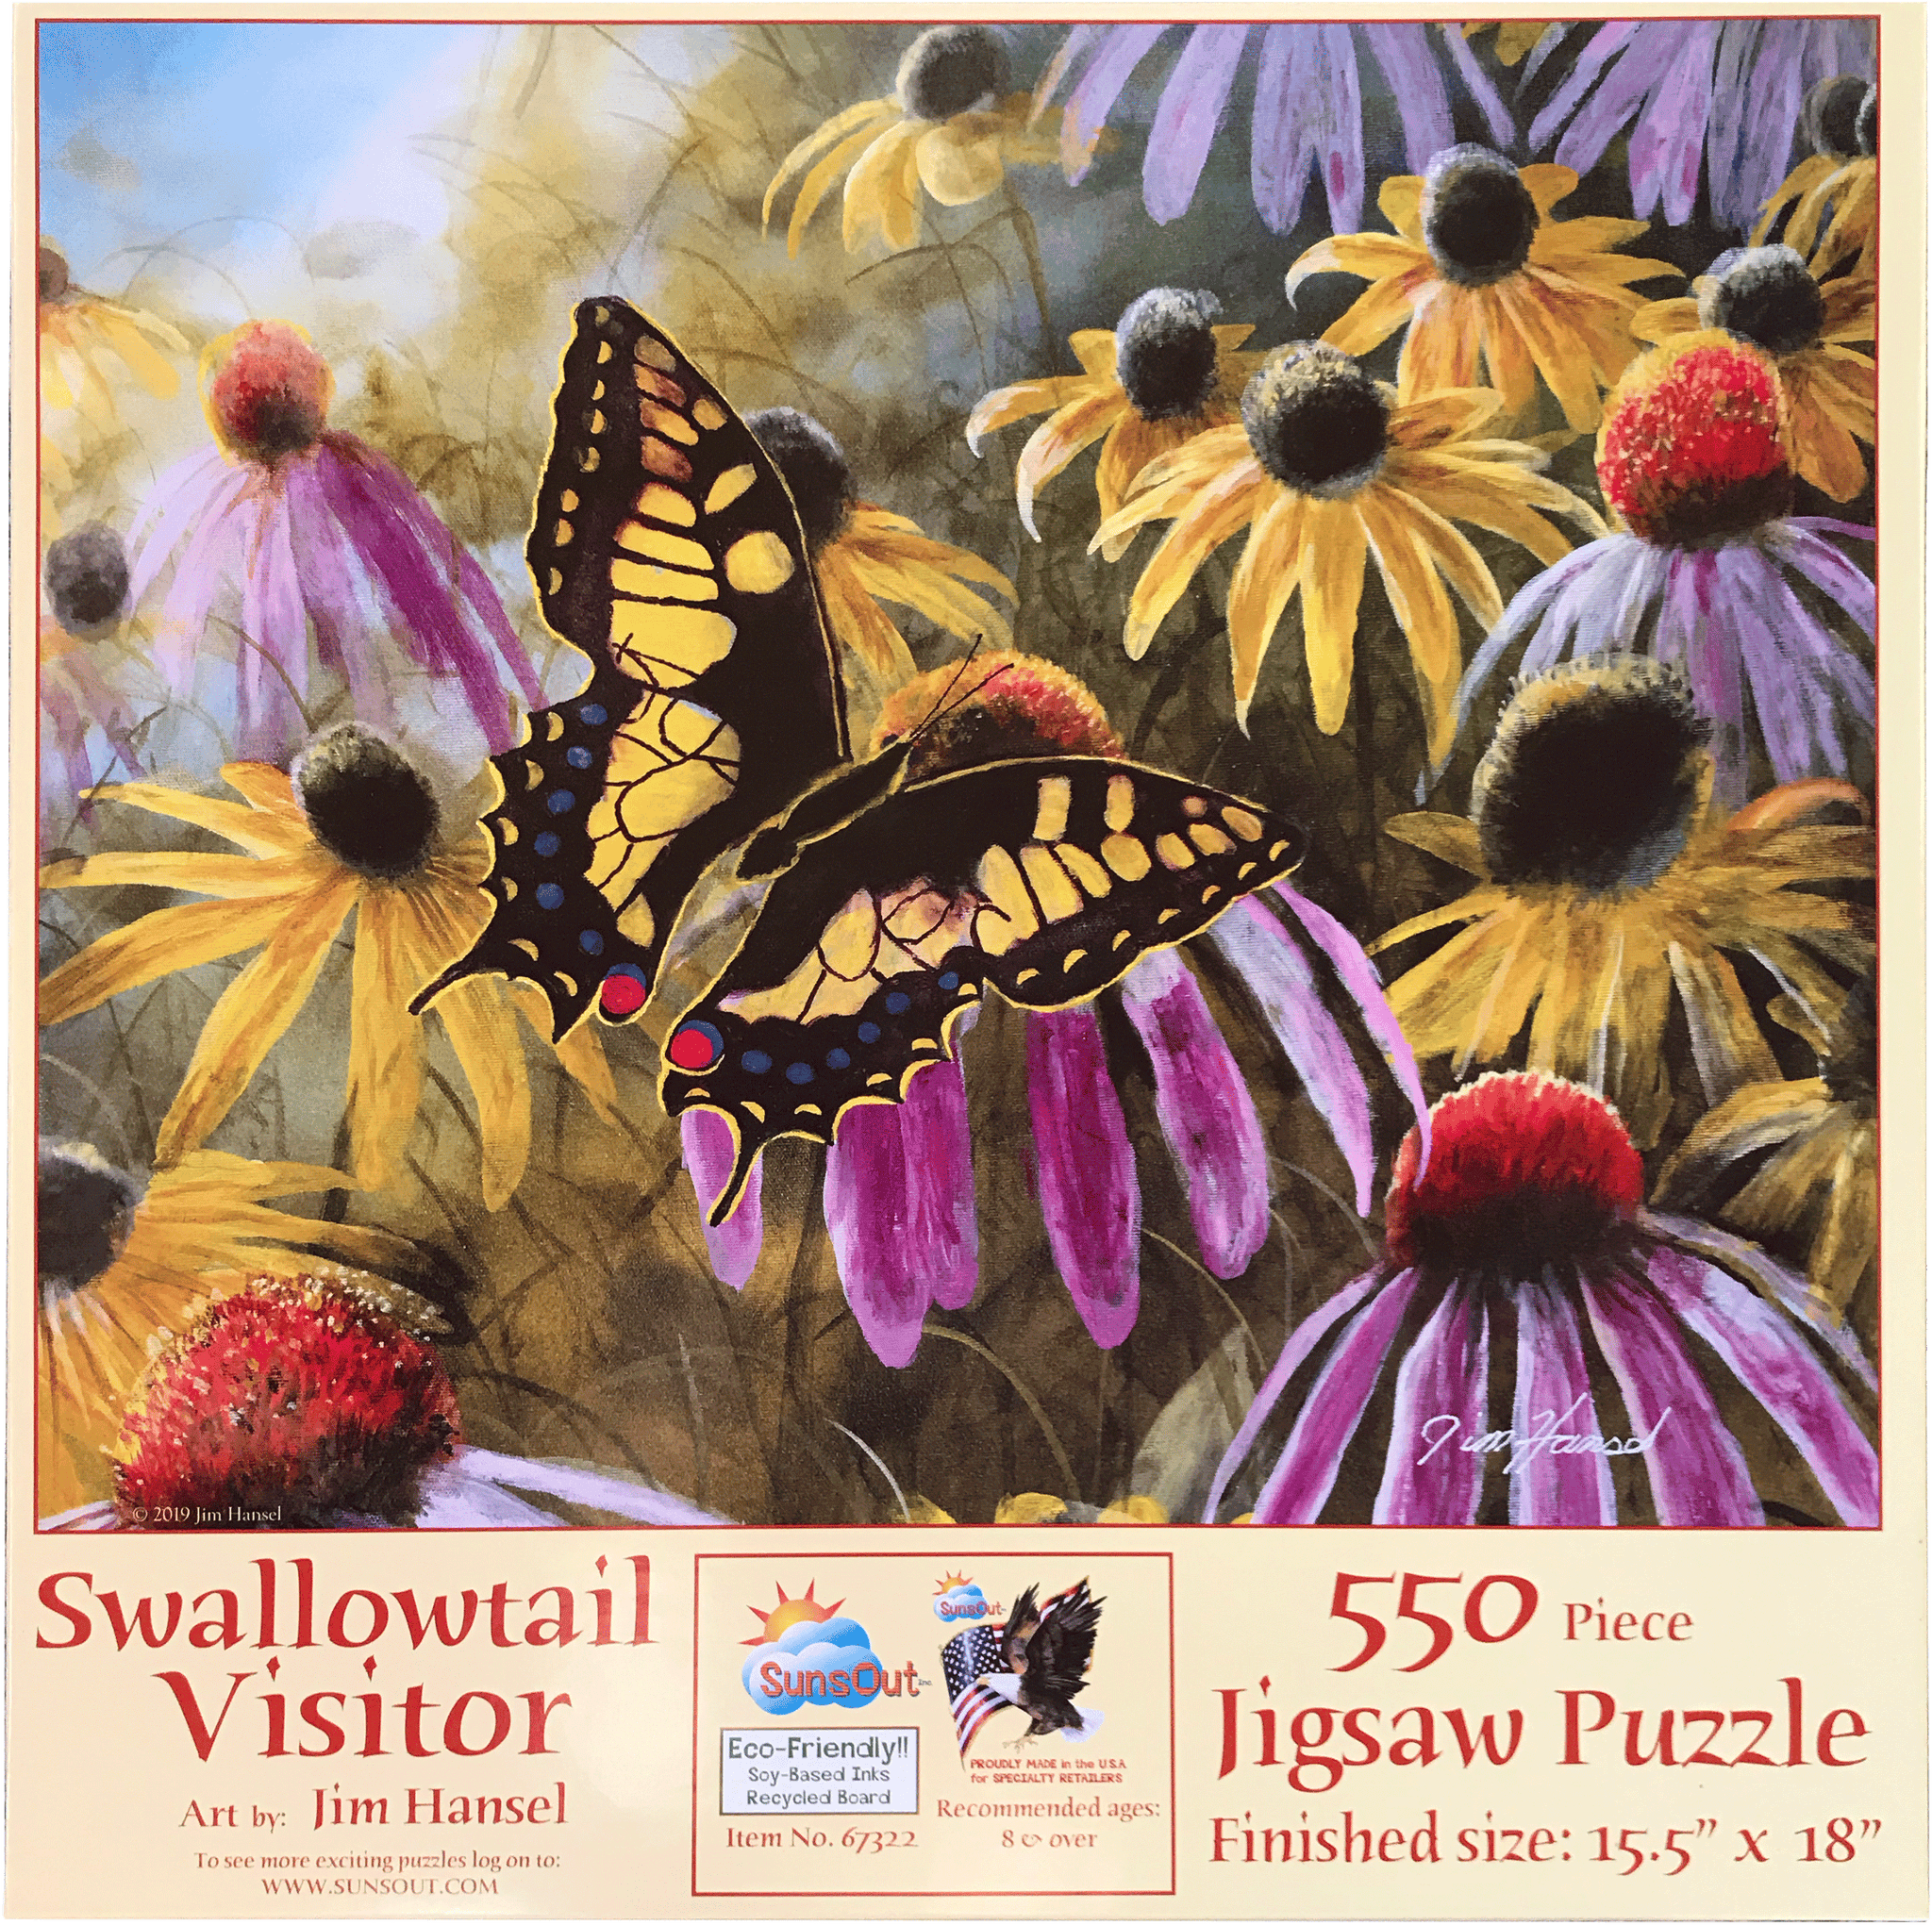 Garden Visitor - Swallowtail Butterfly 550 Piece Puzzle